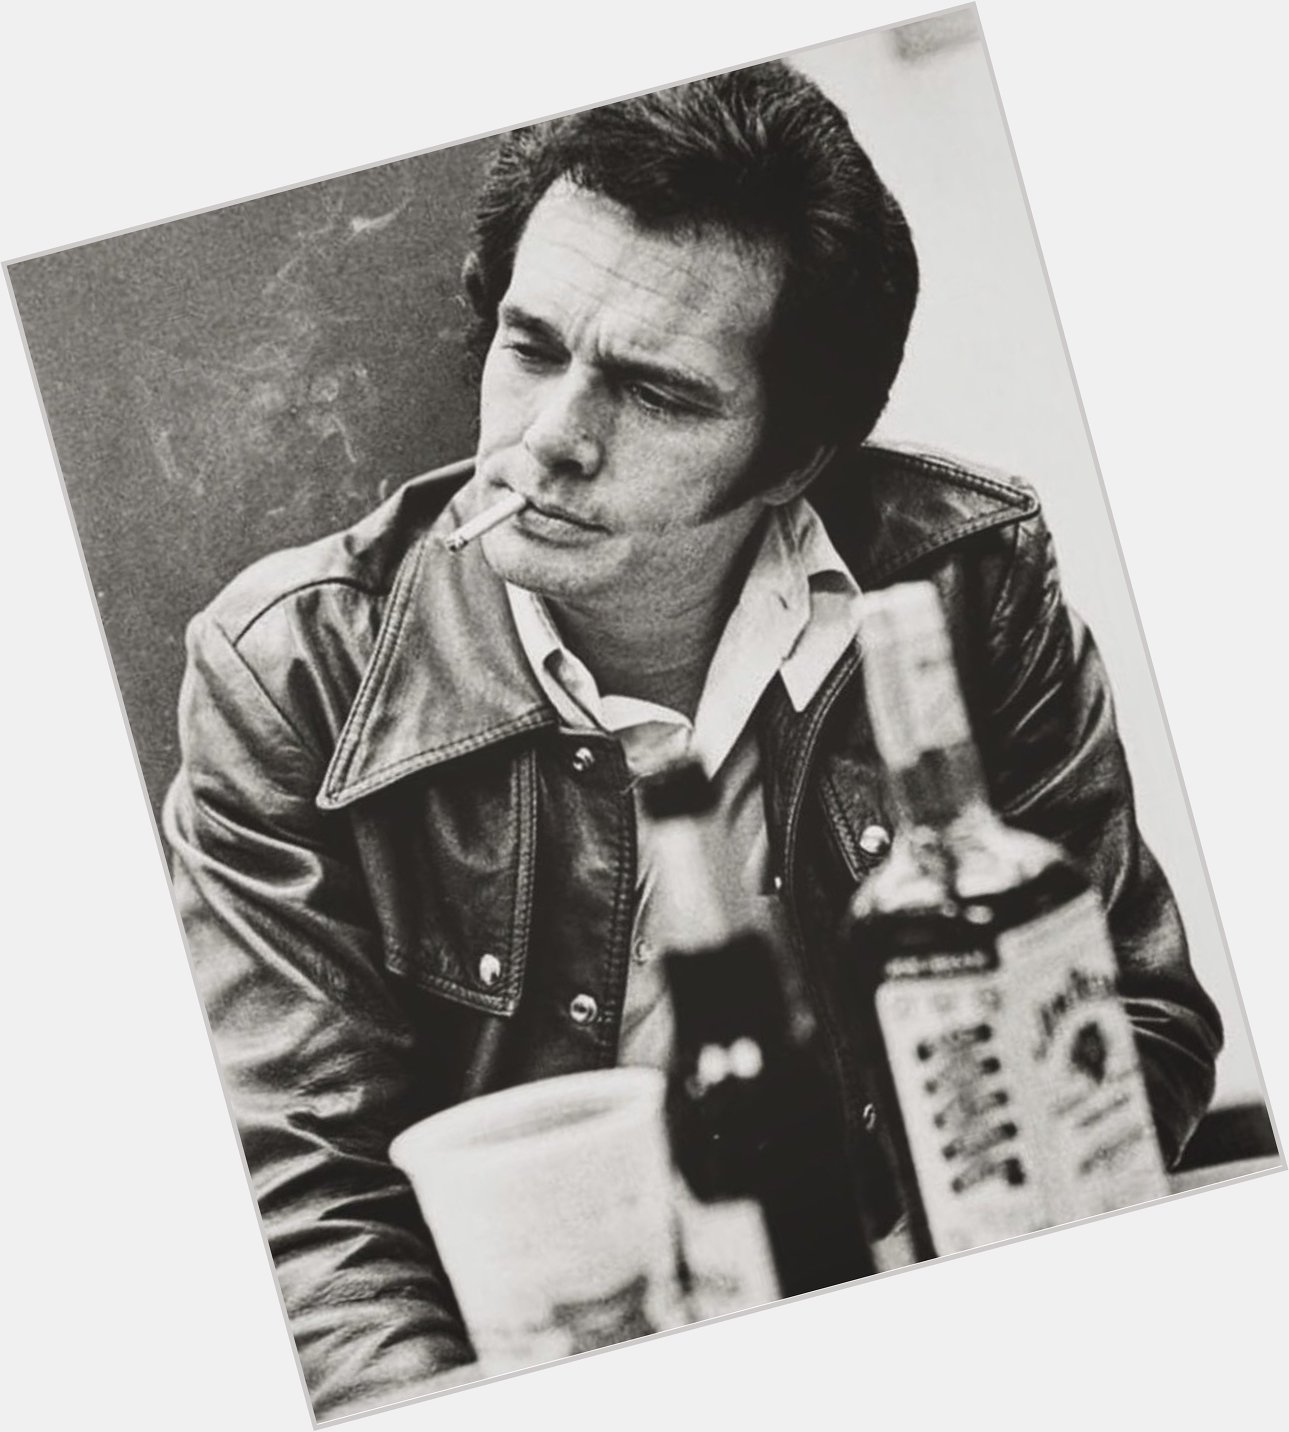 Three years ago today we lost a  legend. Rest in peace and Happy birthday to the one and only Merle Haggard! 